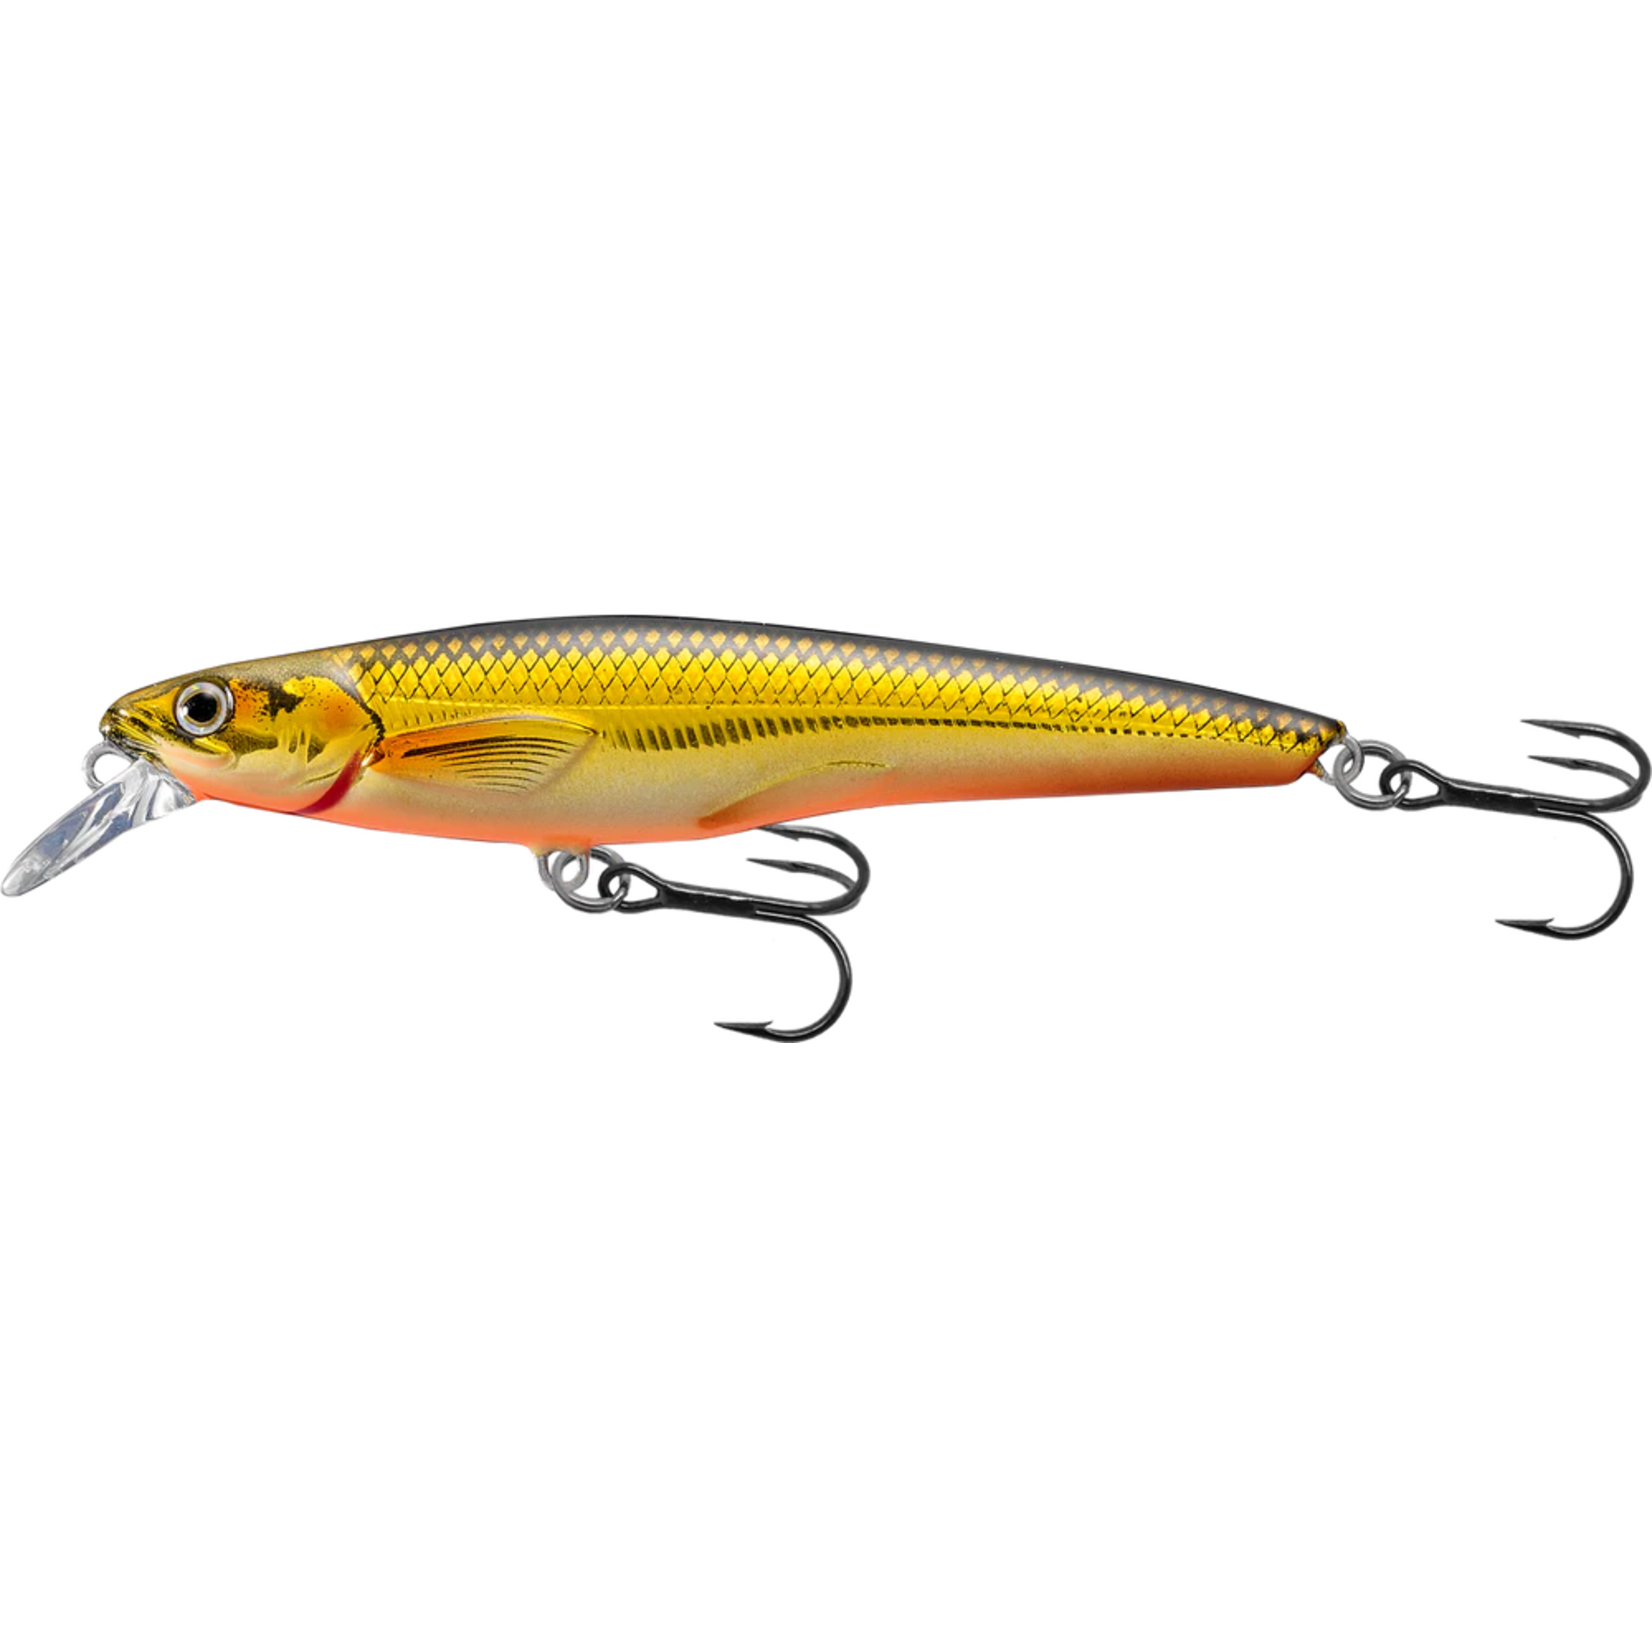 Pearl Bright Green Emerald Shiner- LiveTarget- - Erie Outfitters